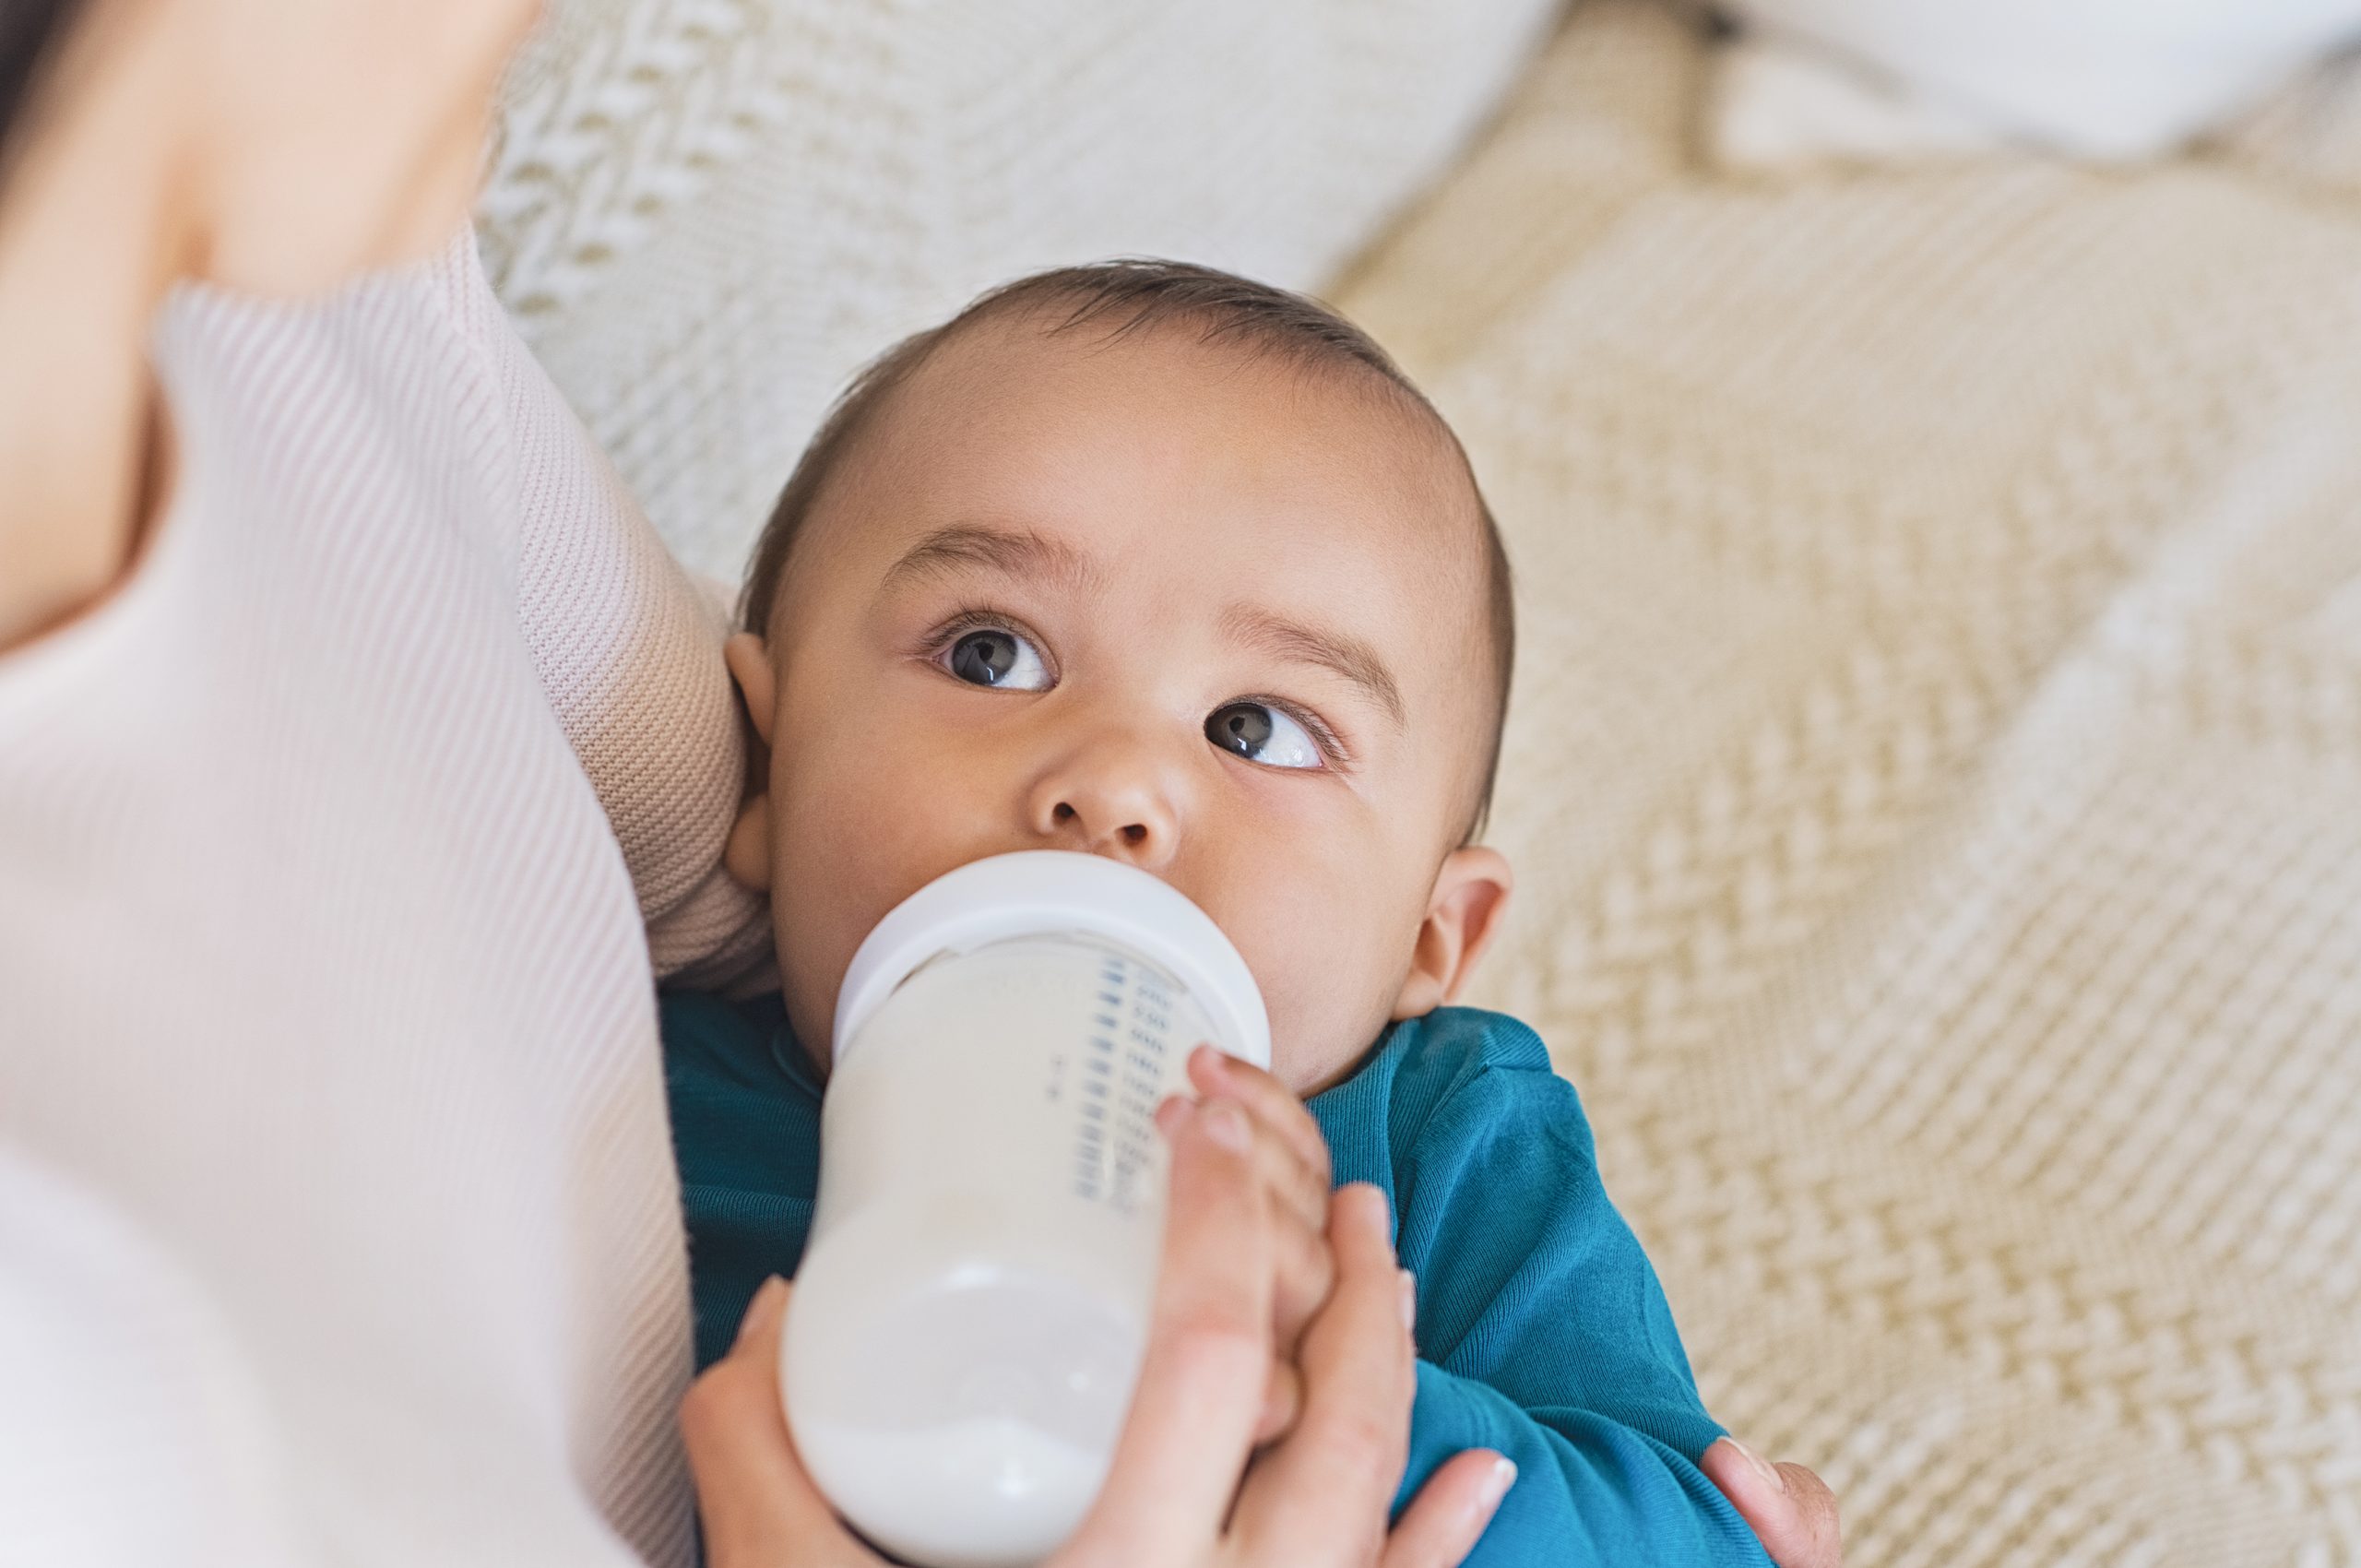 How to Bottle-Feed a Baby